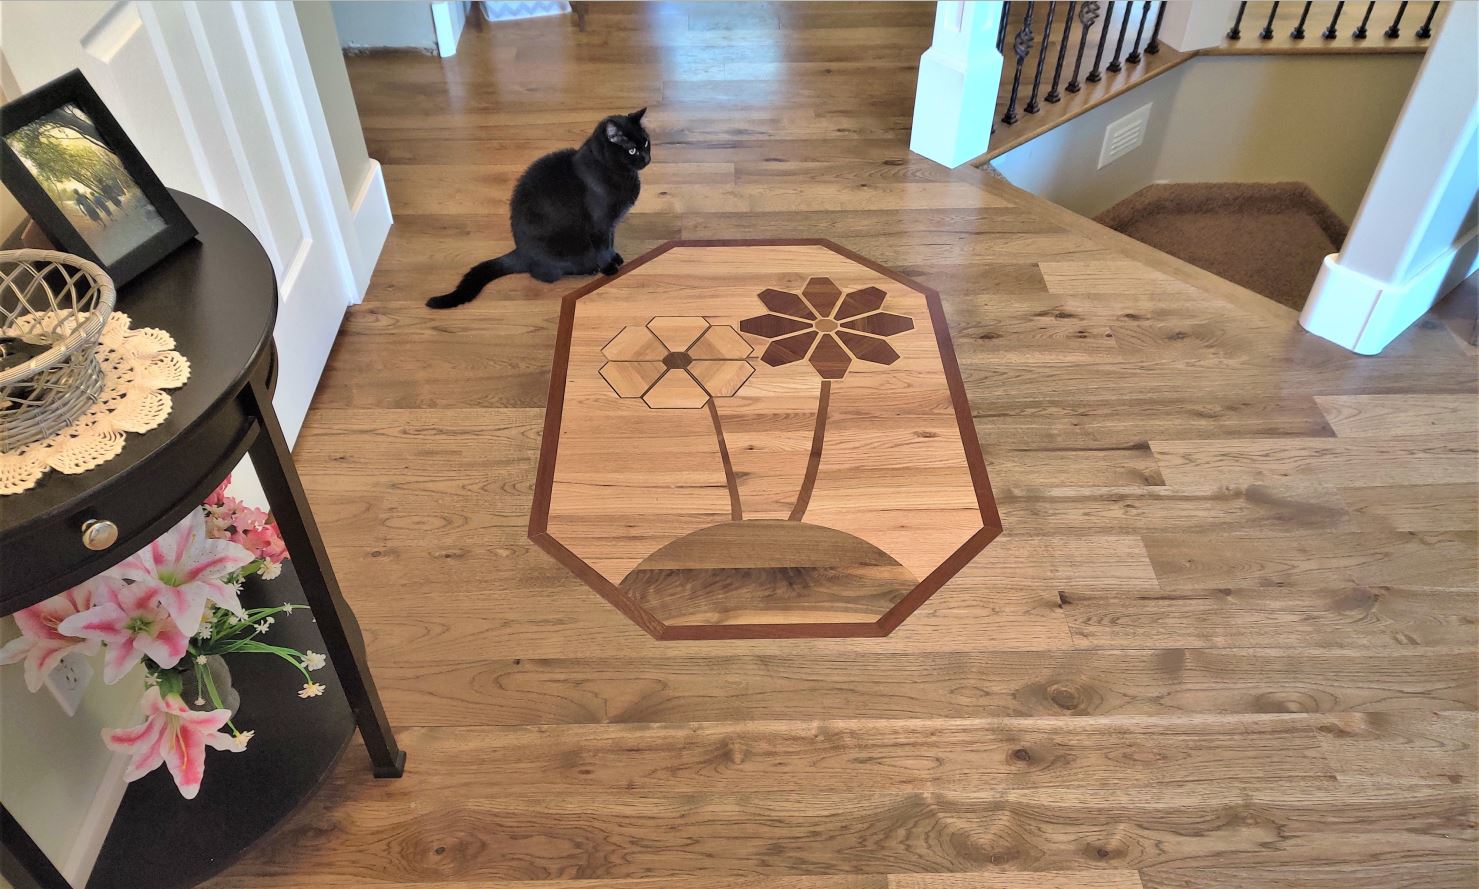 a hickory solid wood floor with a custom designed inlay medallion, picturing 2 flowers made from Santos mahogany, maple, walnut, and American cherry, on a red oak background, with a Brazilian cherry border, installed by Hardwood Floorist in a customer's entry way. The customer's beautiful black cat is sitting on the floor next to the medallion, looking down at it.